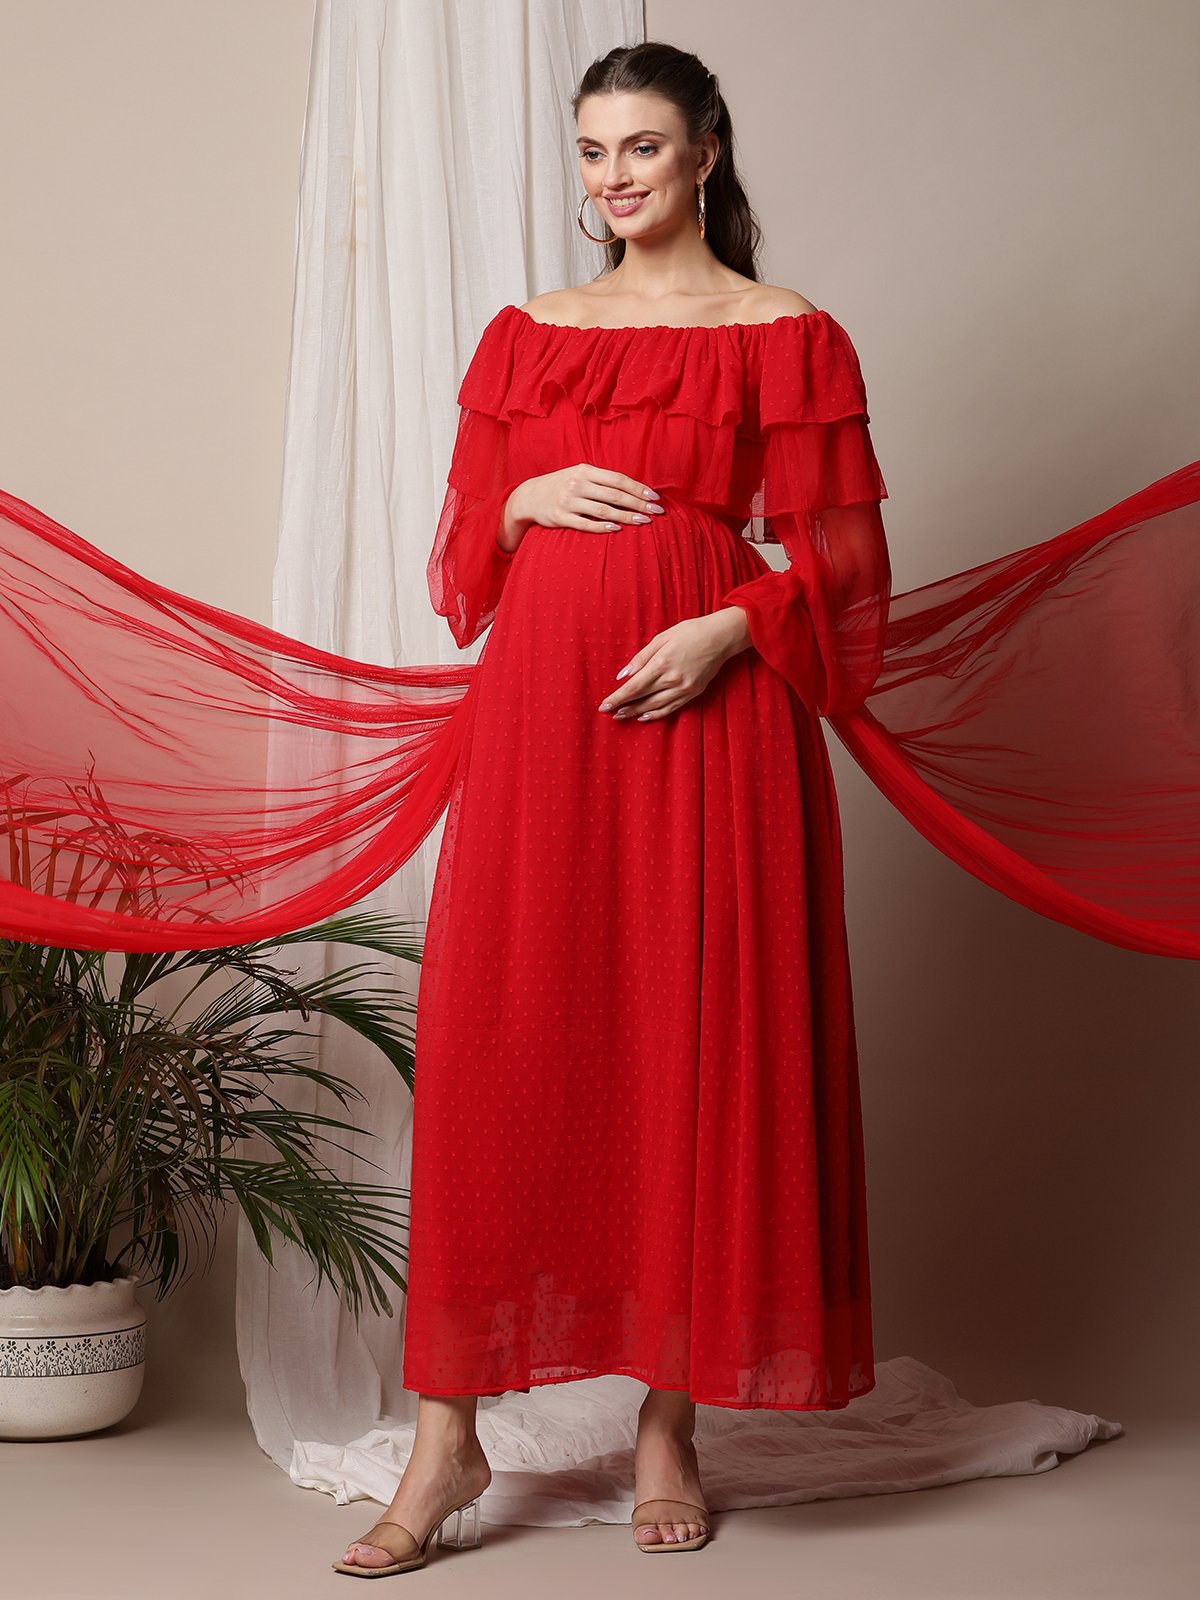 Red Pregnancy Maternity Photoshoot Dress with Long Train | eBay